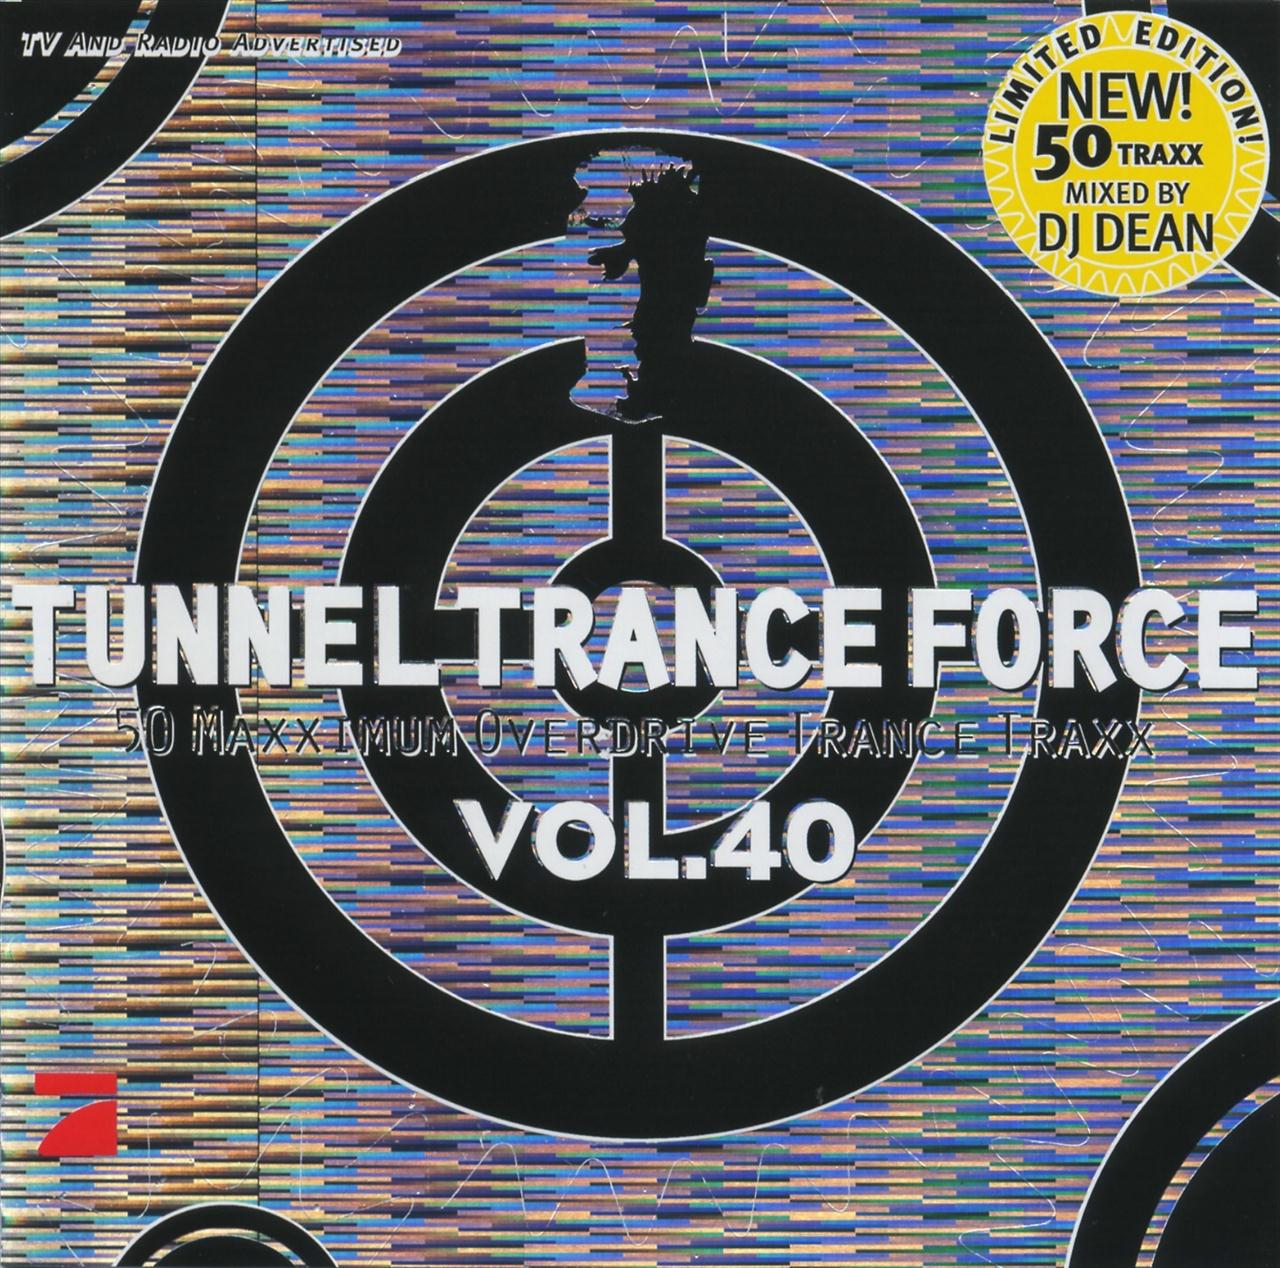 Tunnel Trance Force vol.40 - 000_va_-_tunnel_trance_force_vol_40-cover_front.jpg